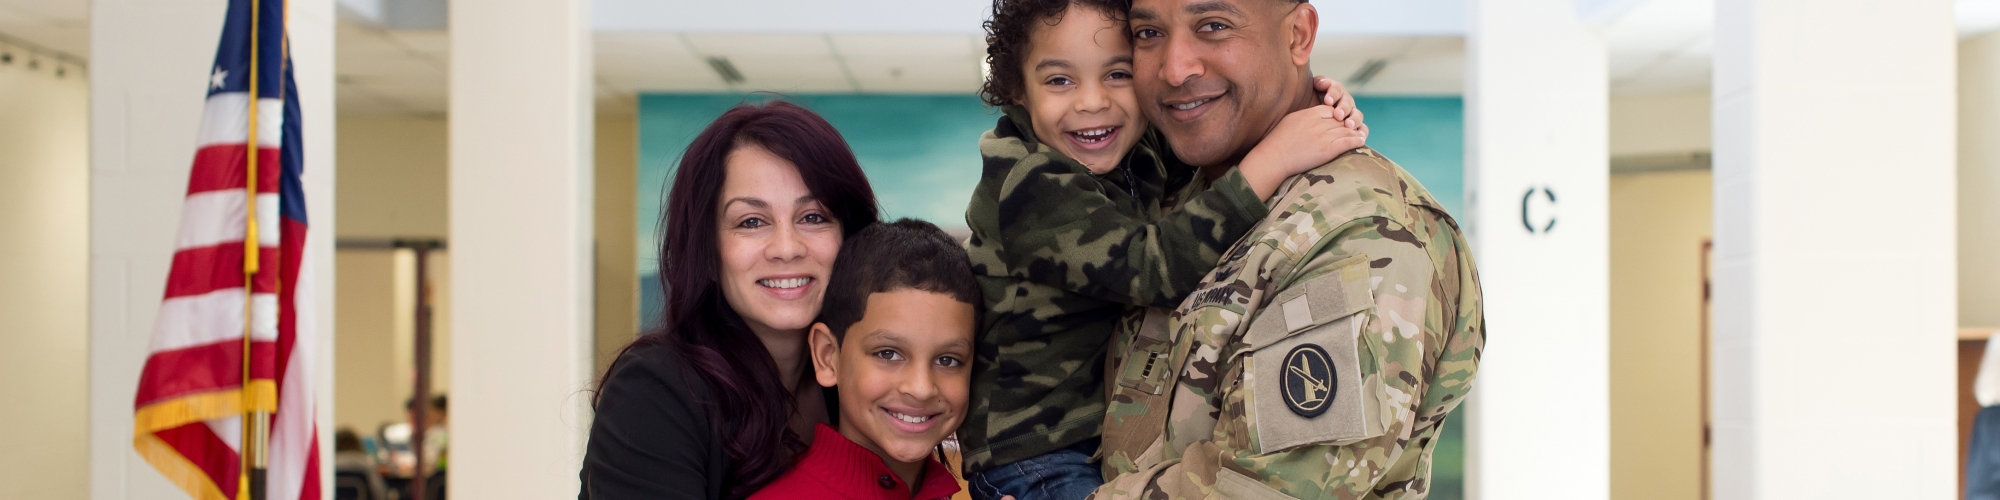 a family standing together smiling with dad in a military uniform